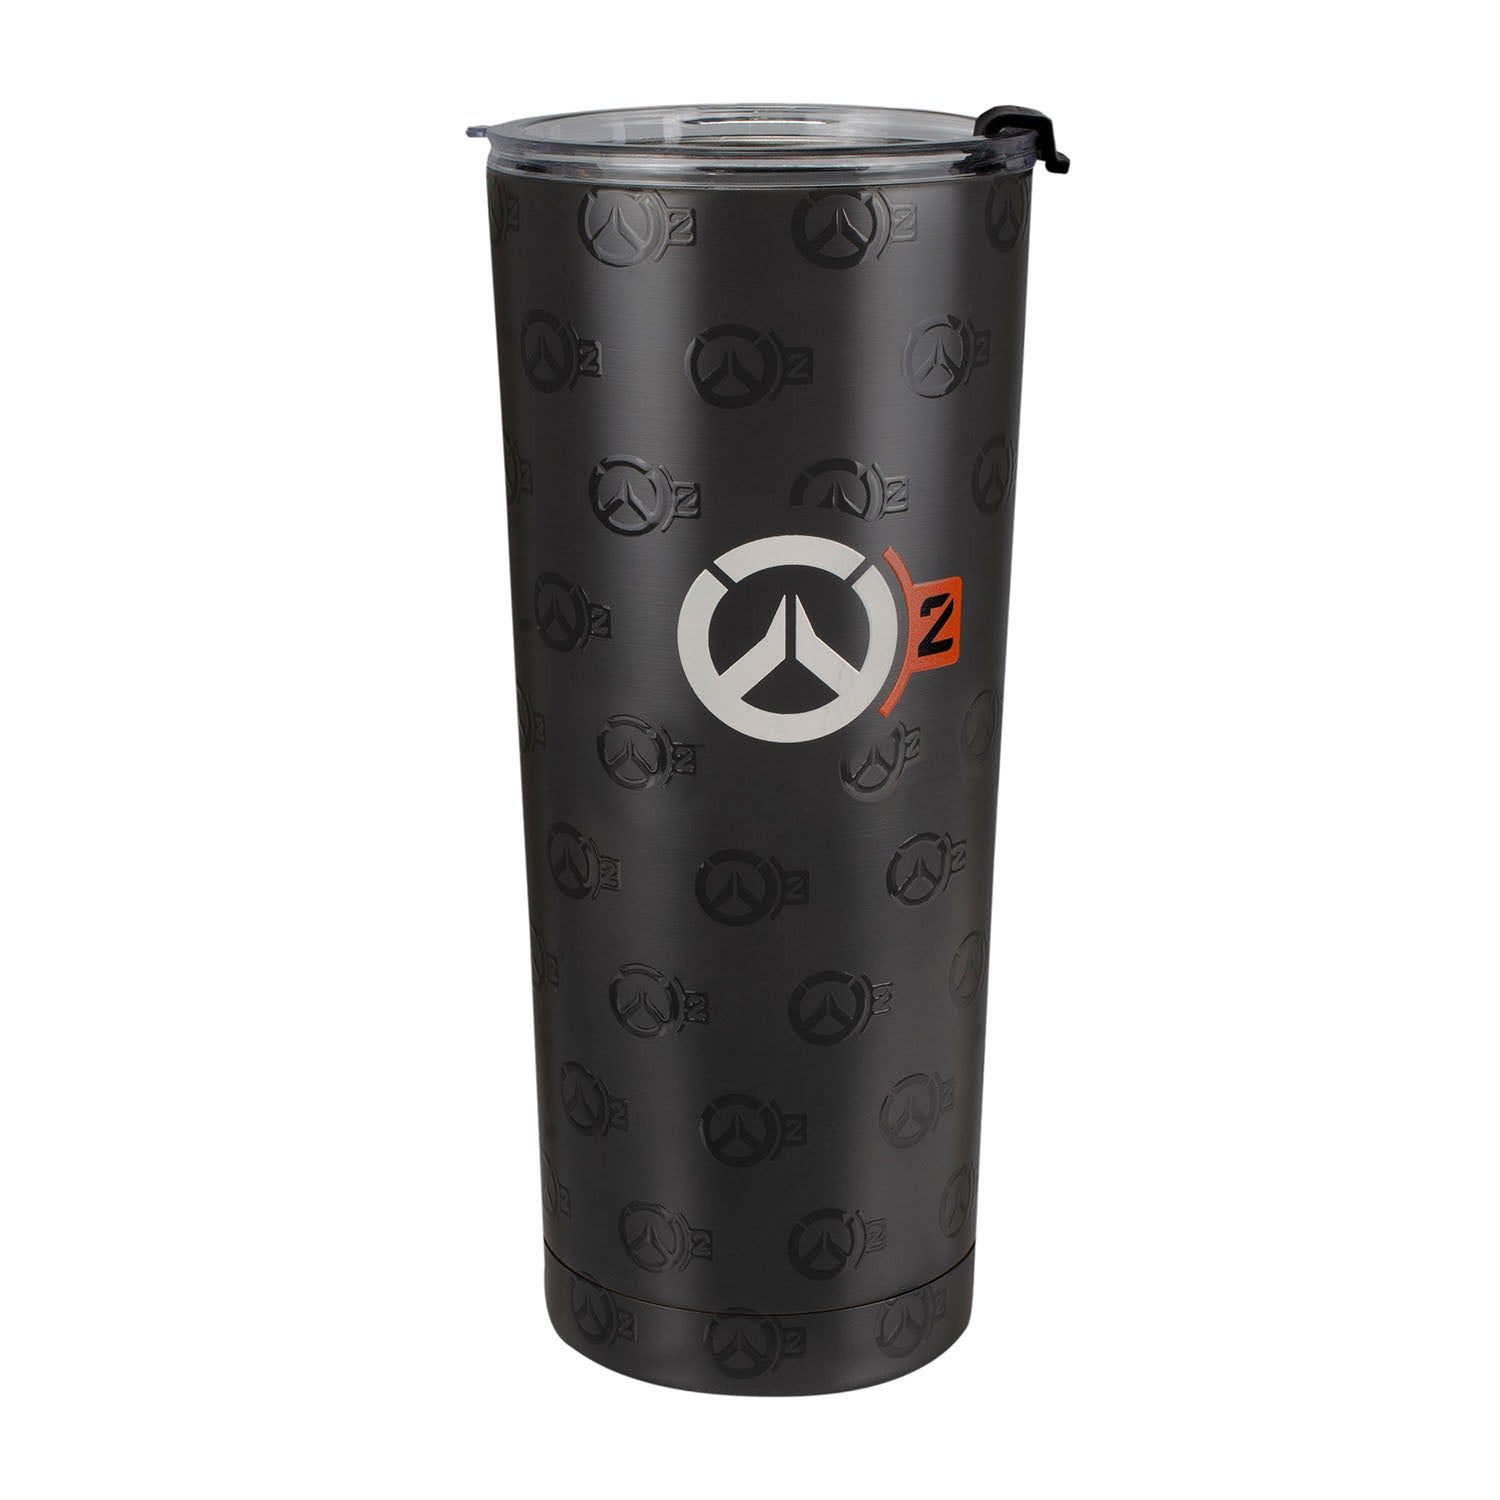 Overwatch 2 650ml Stainless Steel Tumbler - Back View